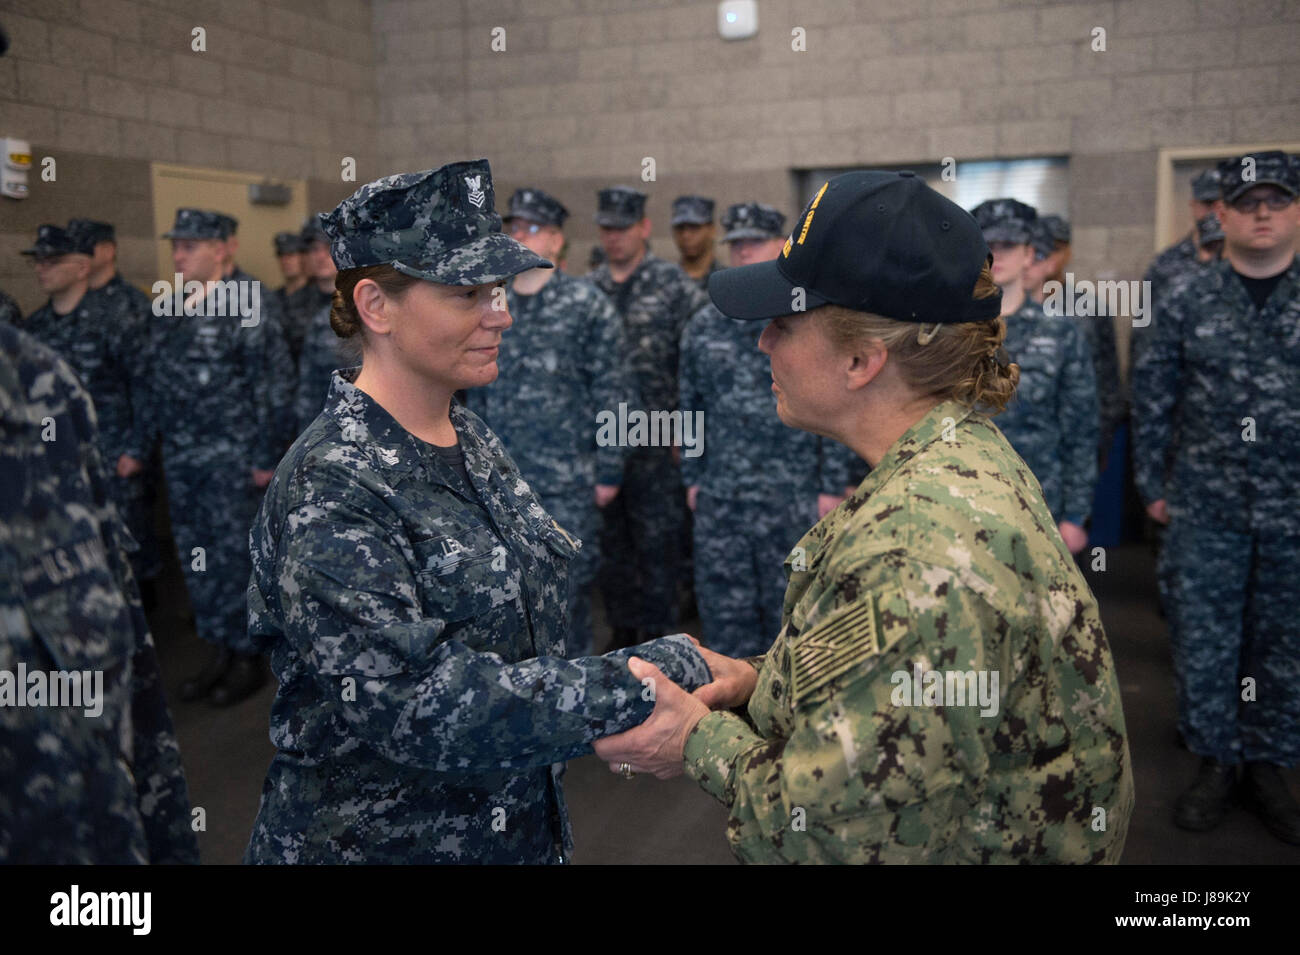 170520-N-QP351-066 INDIANAPOLIS (May 20, 2017) Rear Admiral Linda Wackerman, Deputy Commander, U.S. Naval Forces Southern Command, 4th Fleet, visits with Sailors from Navy Operational Support Center Indianapolis during an Admirals Call. Wackerman who also serves as the flag mentor for NOSC Indianapolis, held an all-hands Q&A session for E-6 and below Sailors to address upcoming changes and get feedback regarding Navy-related issues they feel need to be improved. (U.S. Navy photo by Mass Communication Specialist 2nd Class (SW/EXW/AW/SC) J. Michael Schwartz) Stock Photo